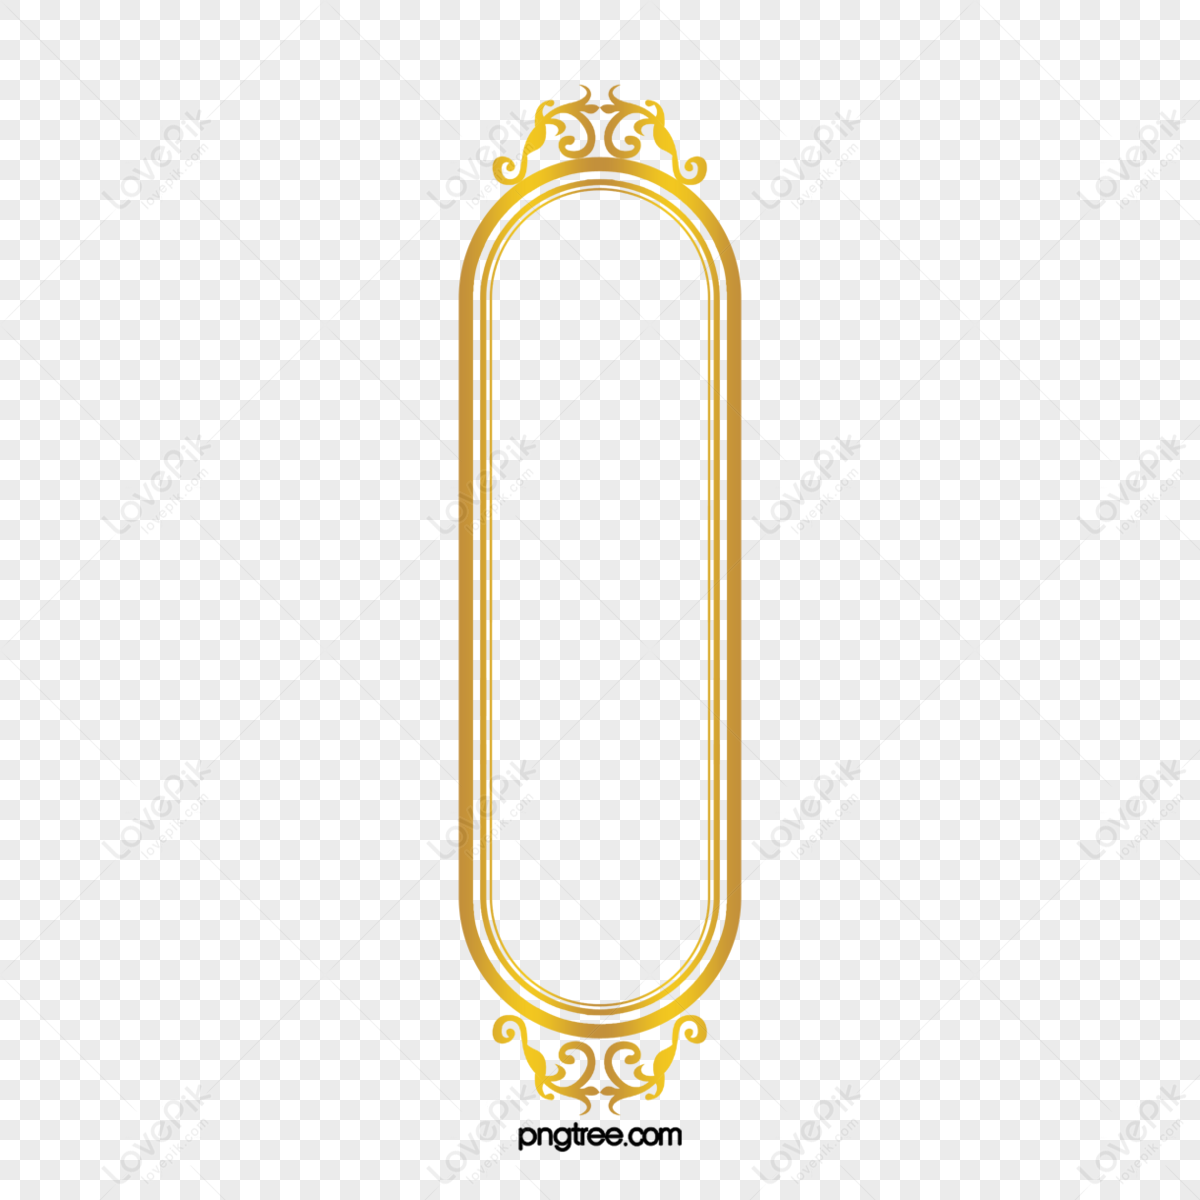 Golden Rectangle Frame PNG Images With Transparent Background | Free ...